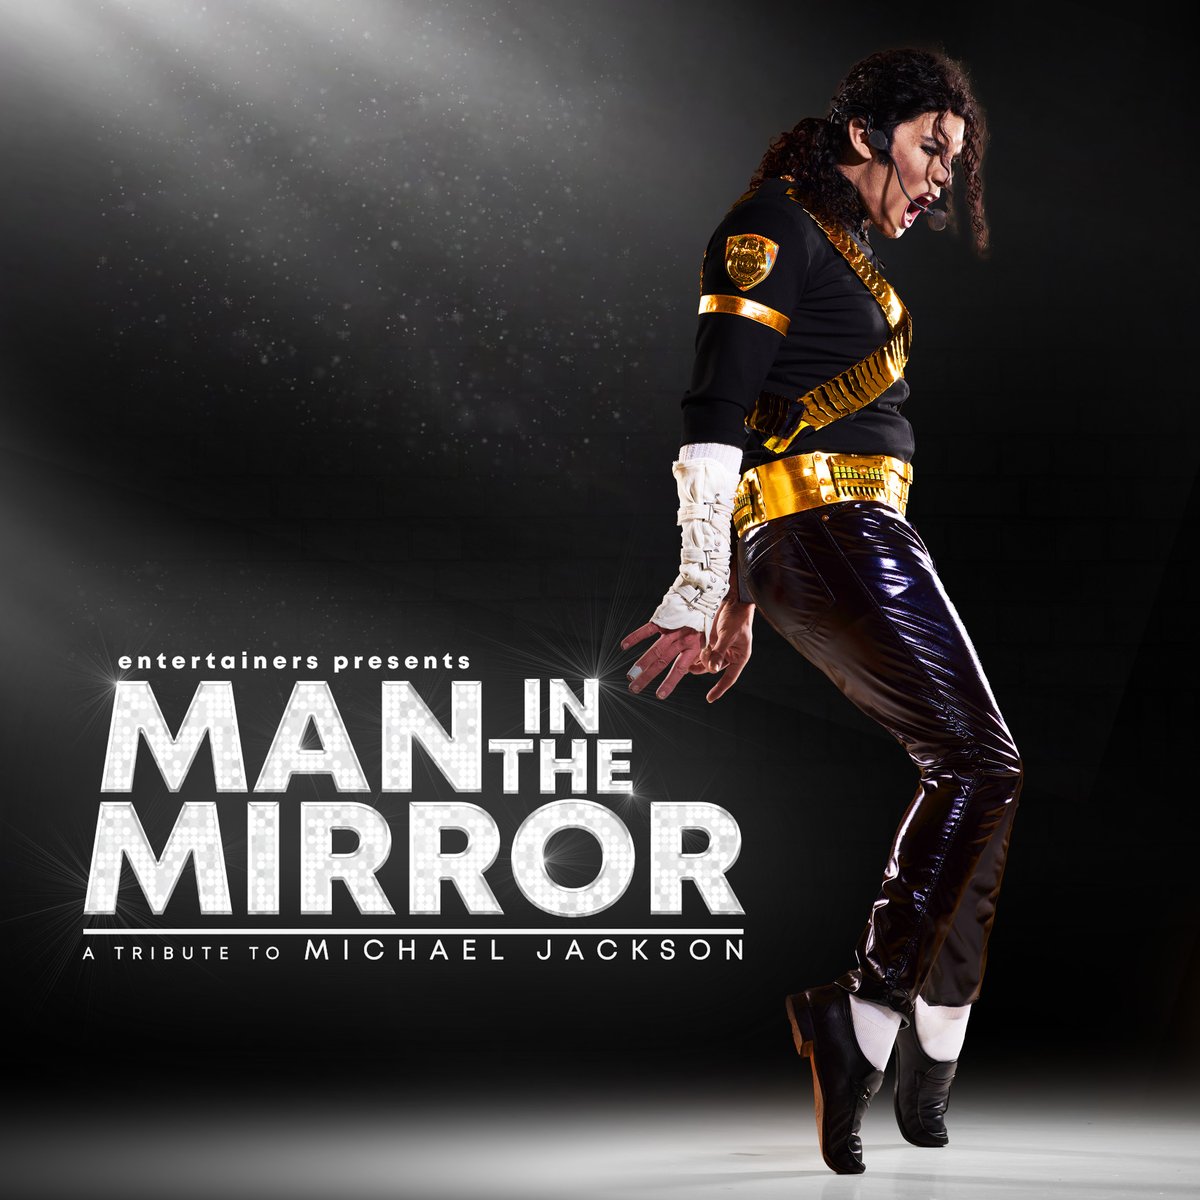 Man in the Mirror - 25 January 2025 Join us for a Thriller of an evening, as we celebrate the legendary music of the KING OF POP. This is the “Man in the Mirror” – The brand new must-see, electrifying tribute concert to Michael Jackson. On sale now: cambridgelive.org.uk/cornex/events/…